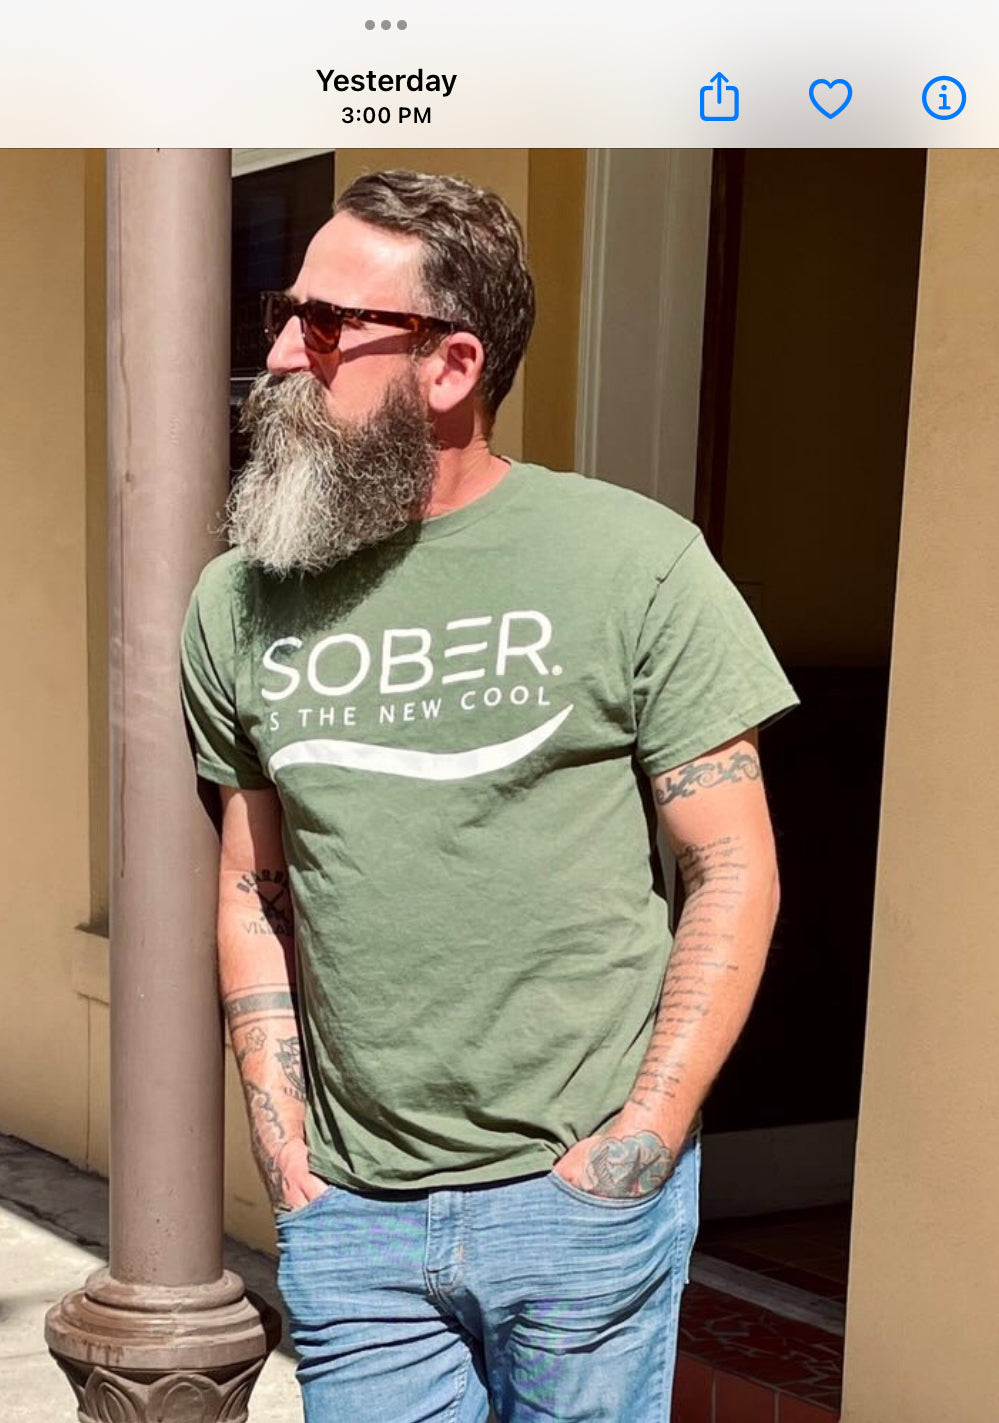 SOBER IS THE NEW COOL